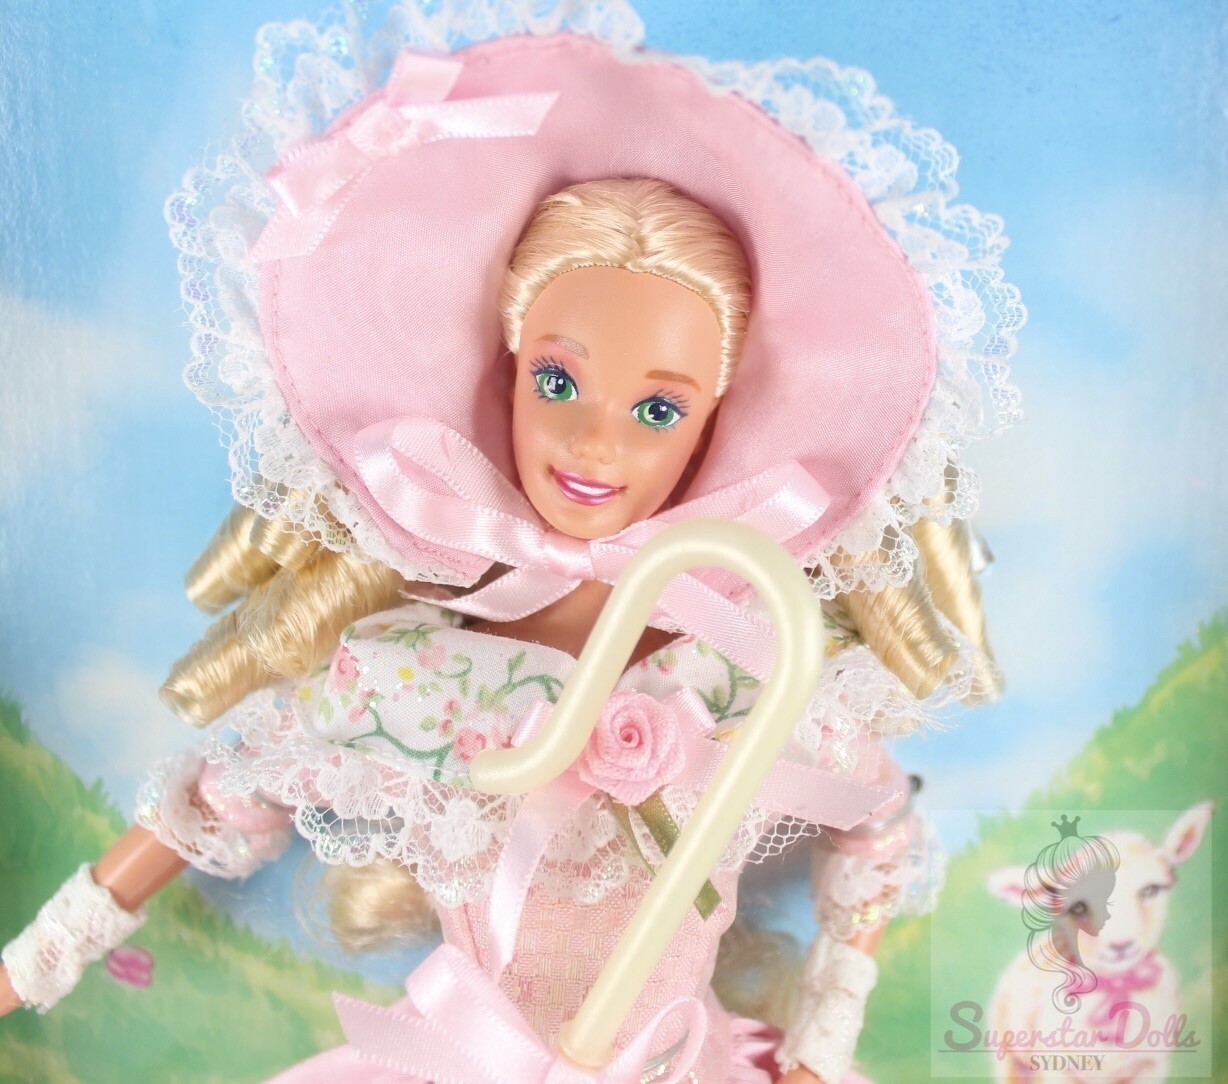 1995 Collector Edition: Barbie as Little Bo Peep Doll